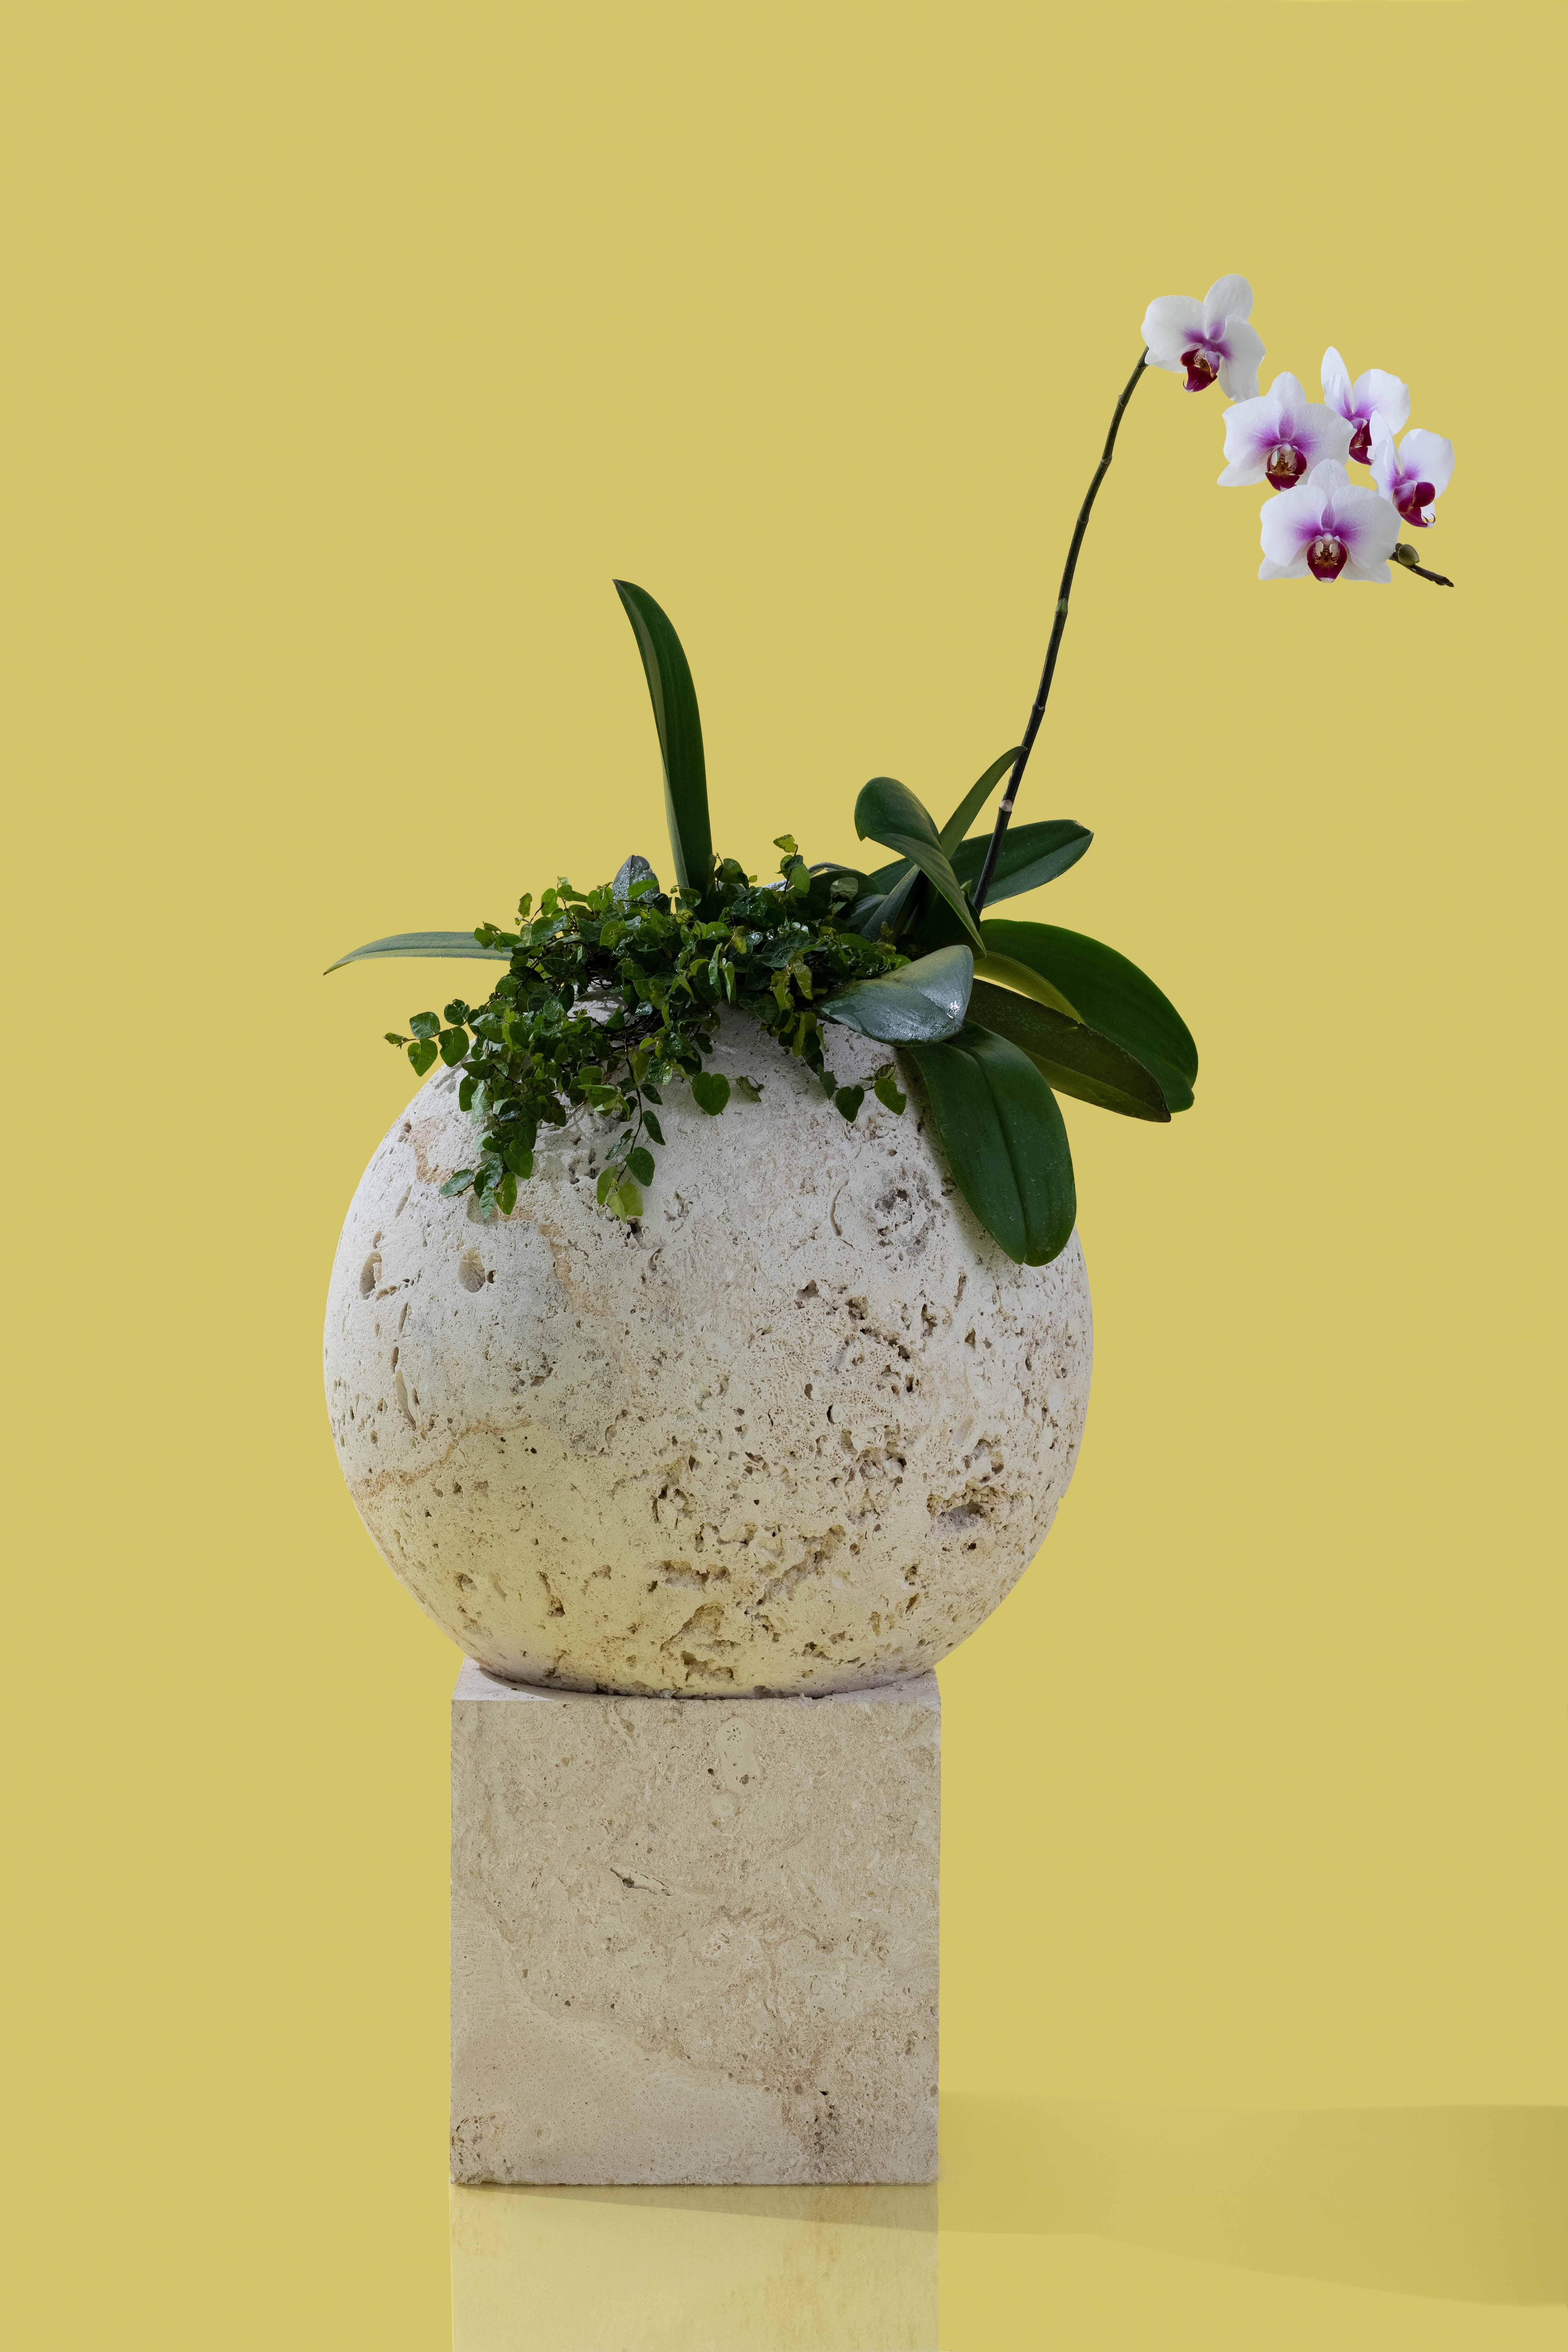 Made to order Florida keystone planter with base. 16” diameter 10x10” base.

Inspired by Coral Castle, an oolite limestone structure
created by the Latvian-American eccentric Edward
Leedskalnin in the 1920’s during a time where there was
no